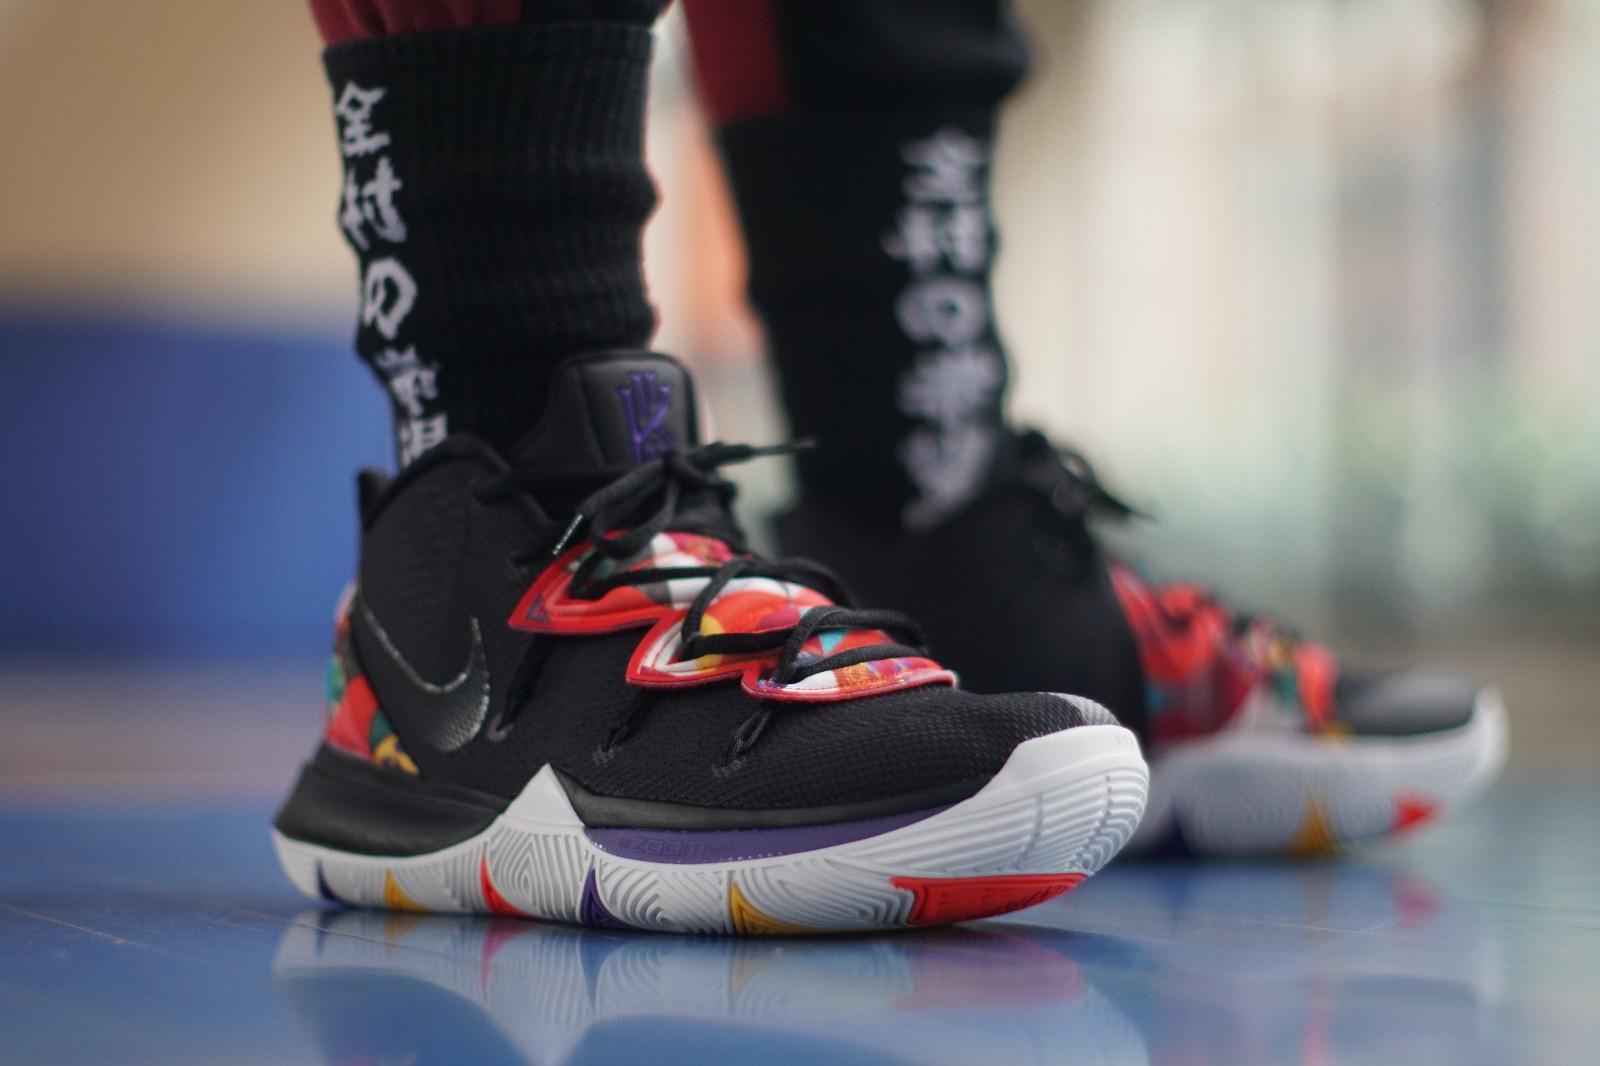 kyrie 5 fit review